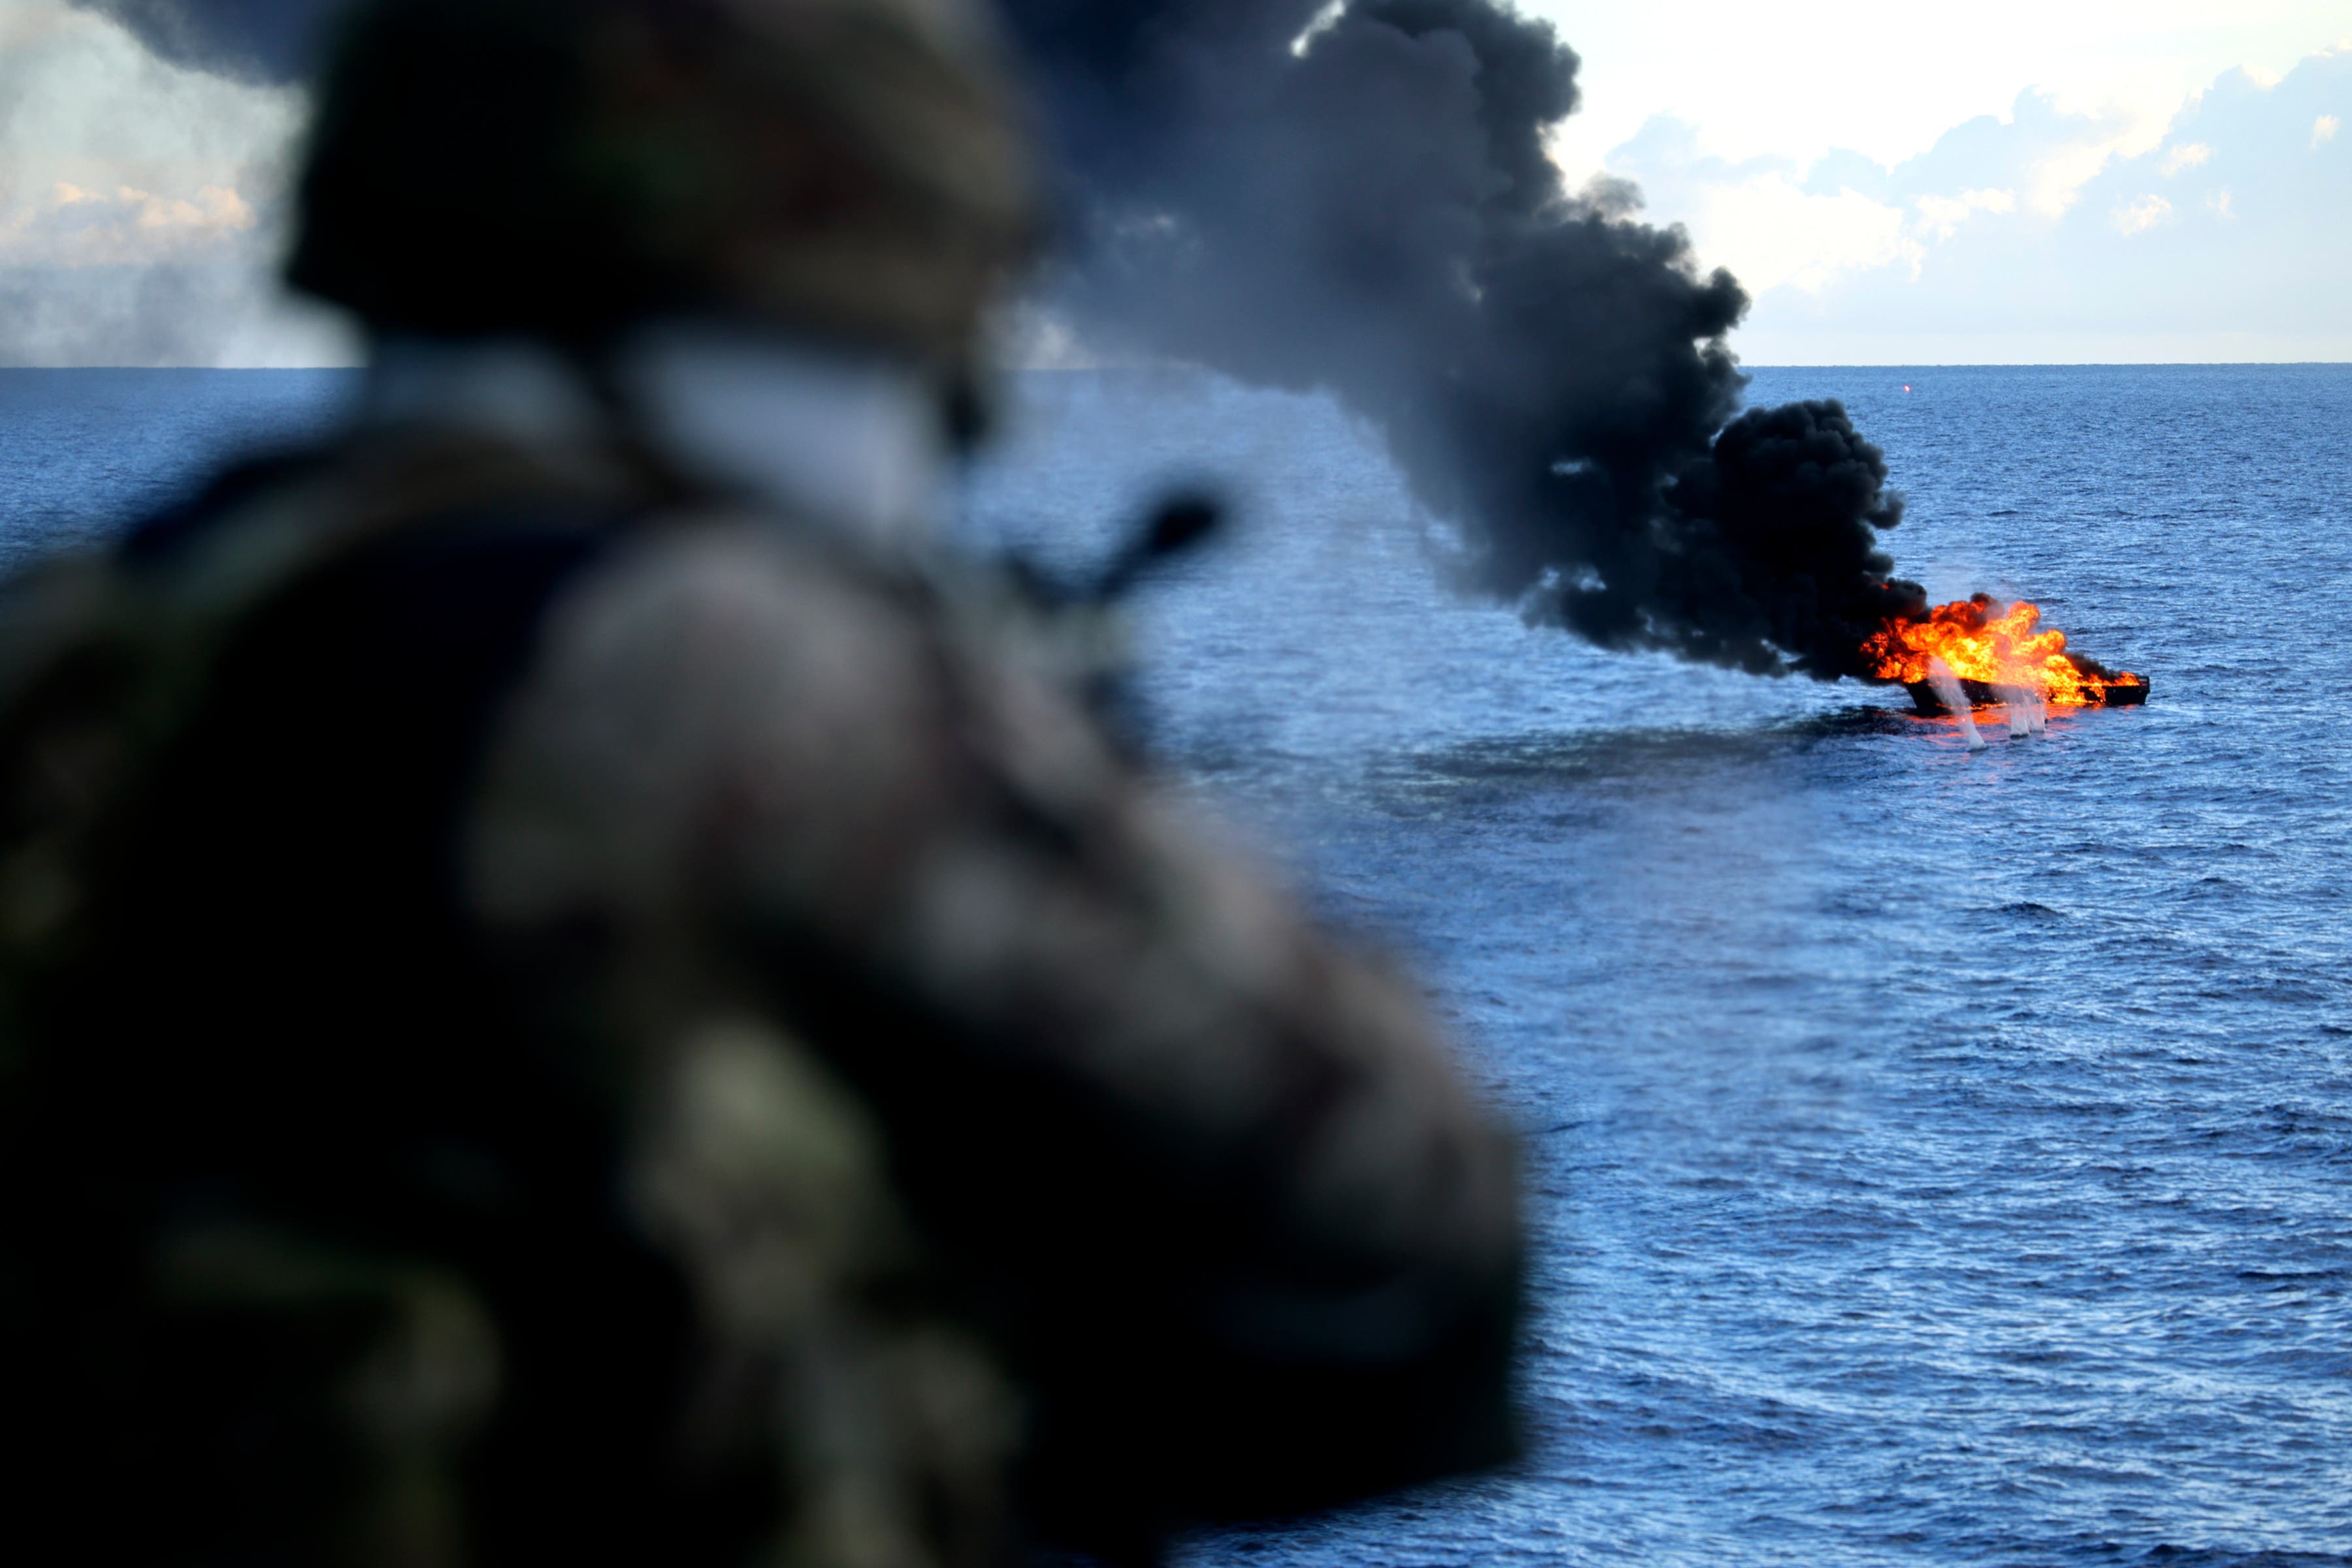 A Royal Navy sailor takes aim at the target of interest following a drugs bust off the Caribbean (Royal Navy/PA)